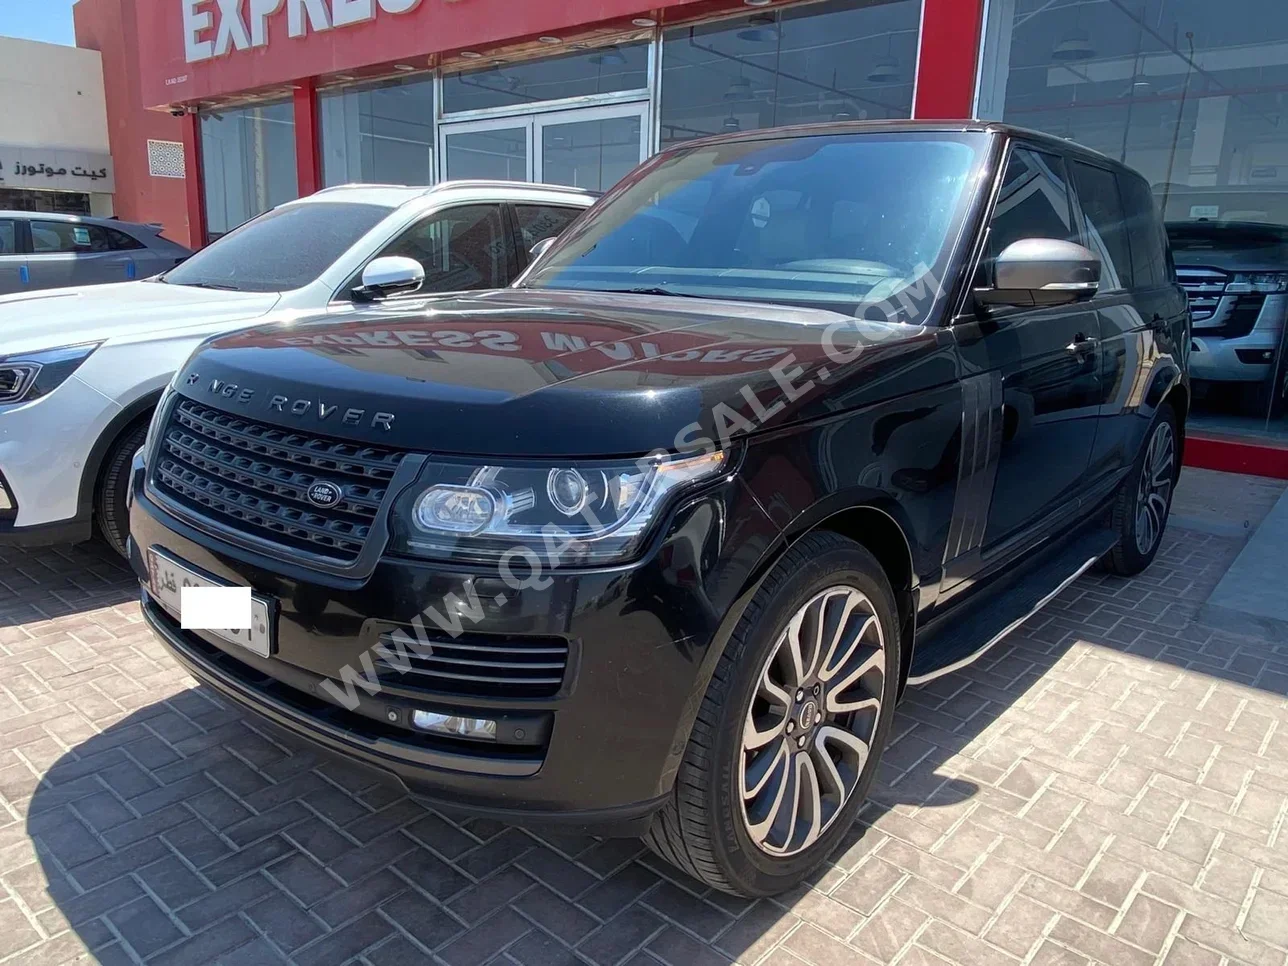 Land Rover  Range Rover  Vogue Super charged  2013  Automatic  142,000 Km  8 Cylinder  Four Wheel Drive (4WD)  SUV  Black